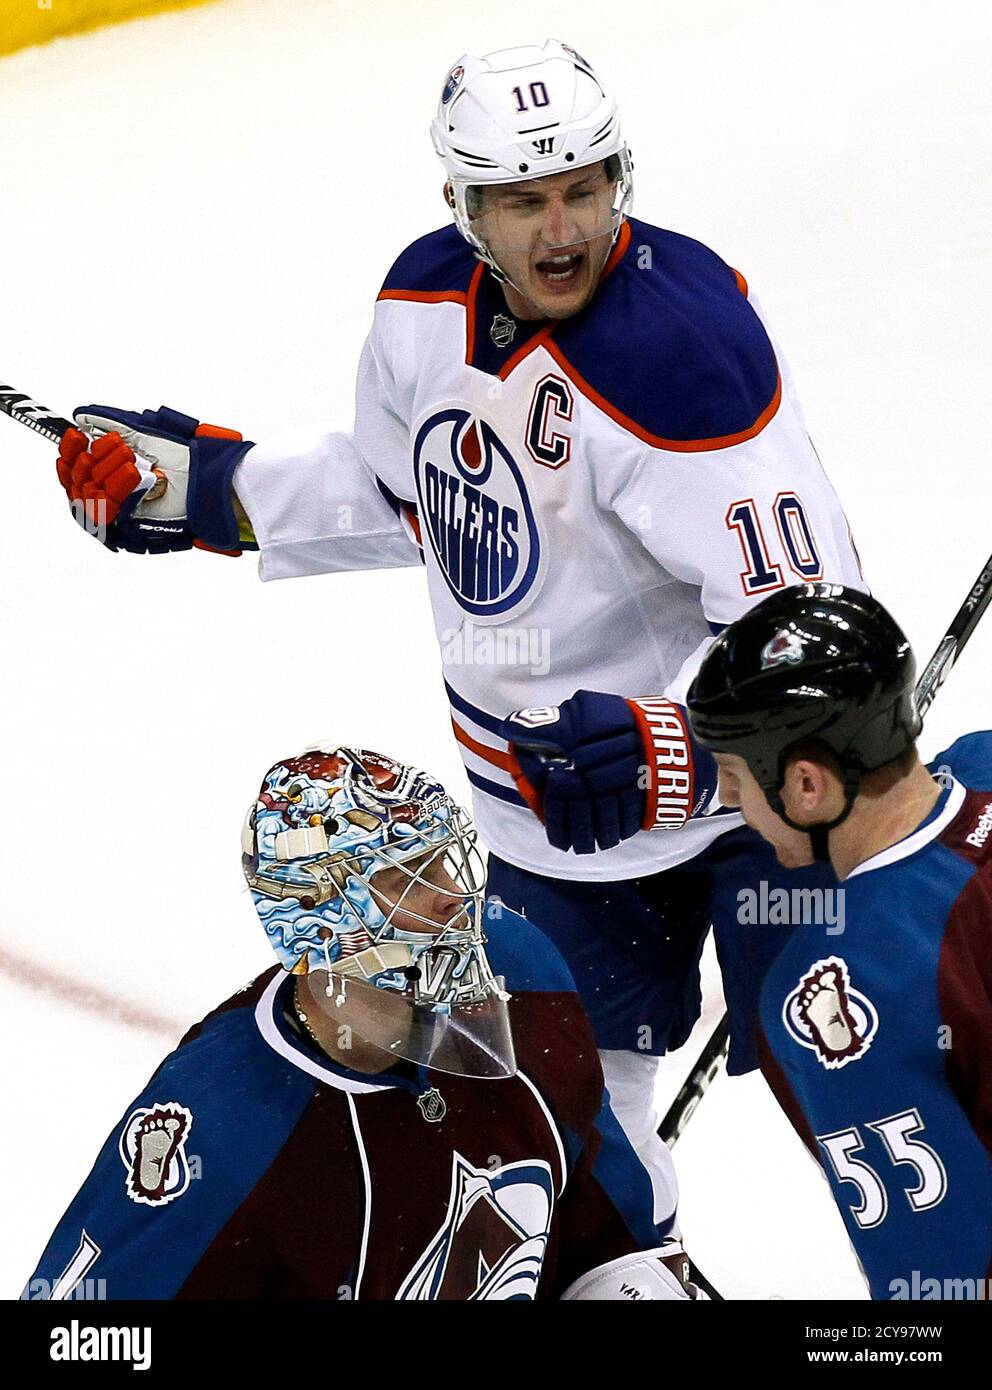 Edmonton Oilers Shawn Horcoff (10) celebrates a third period goal by teammate Ryan Nugent-Hopkins (not seen) past Colorado Avalanche goalie Semyon Varlamov (lower L) in their NHL hockey game in Denver March 12, 2013.  REUTERS/Rick Wilking (UNITED STATES - Tags: SPORT ICE HOCKEY) Stock Photo